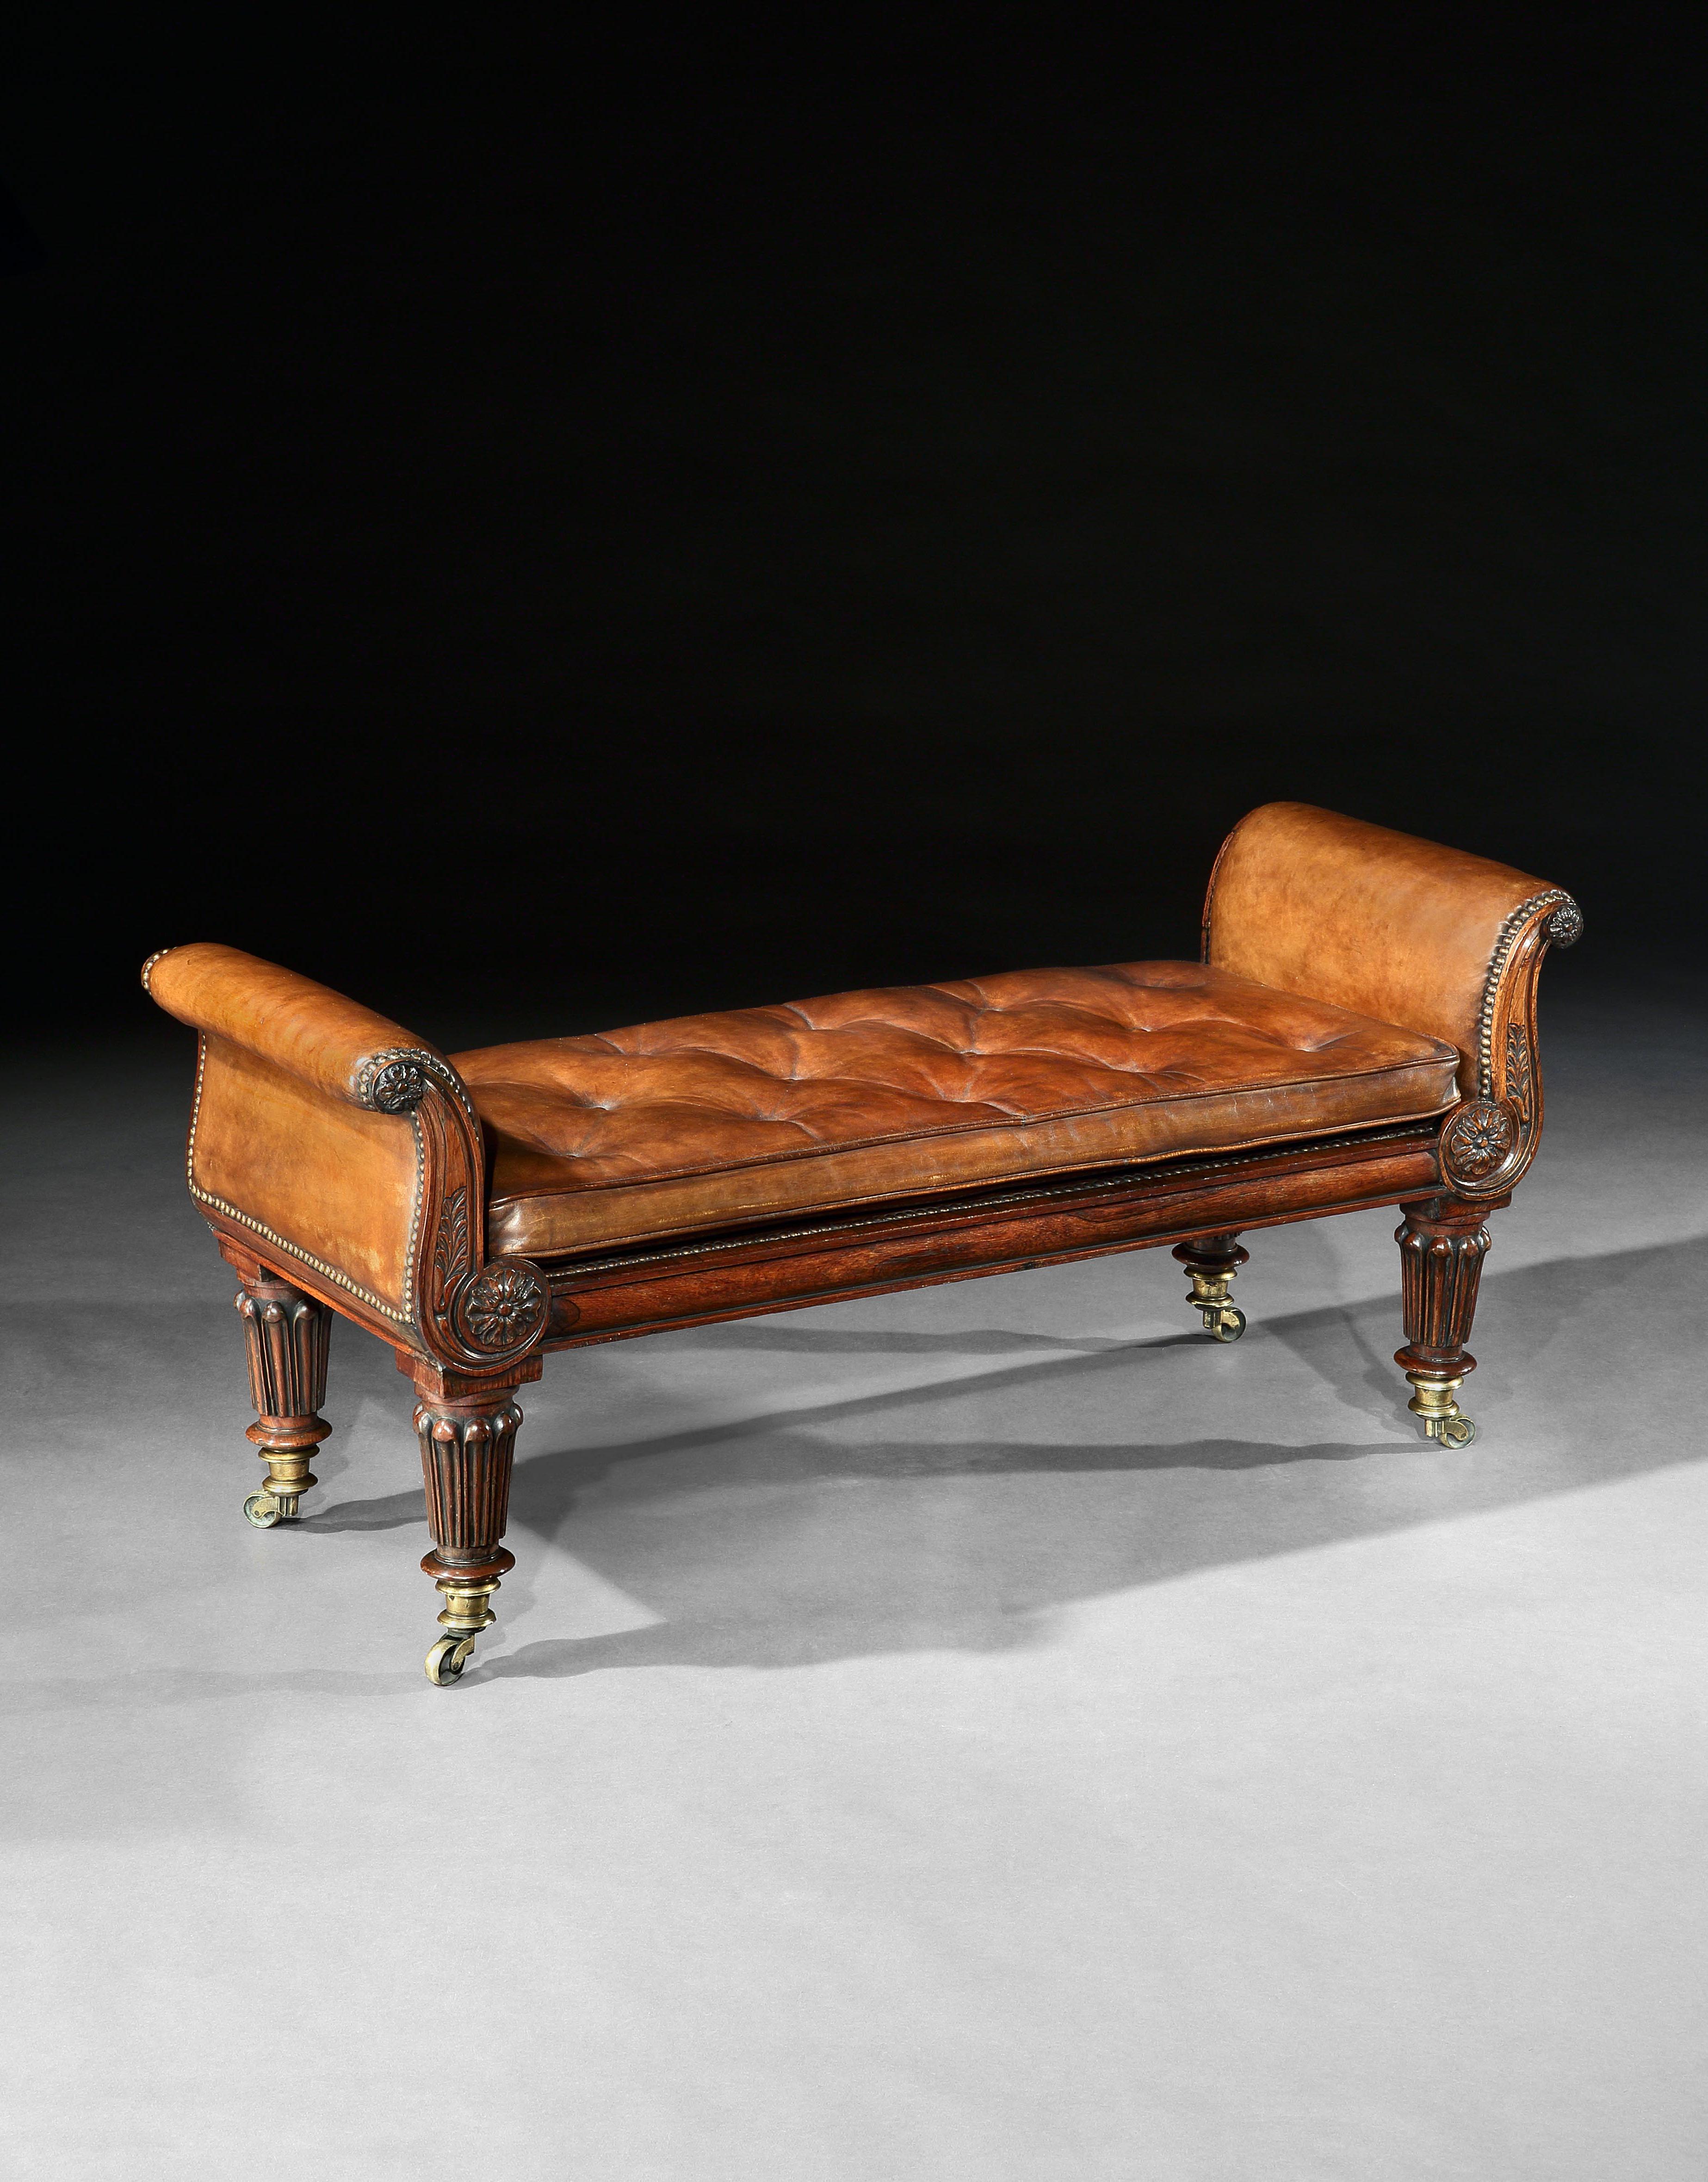 Late Regency George IV period leather upholstered rosewood window seat, bench.

English, circa 1825

A fine George IV period rosewood window seat of generous proportions, having a shallow buttoned leather upholstered cushion seat set within